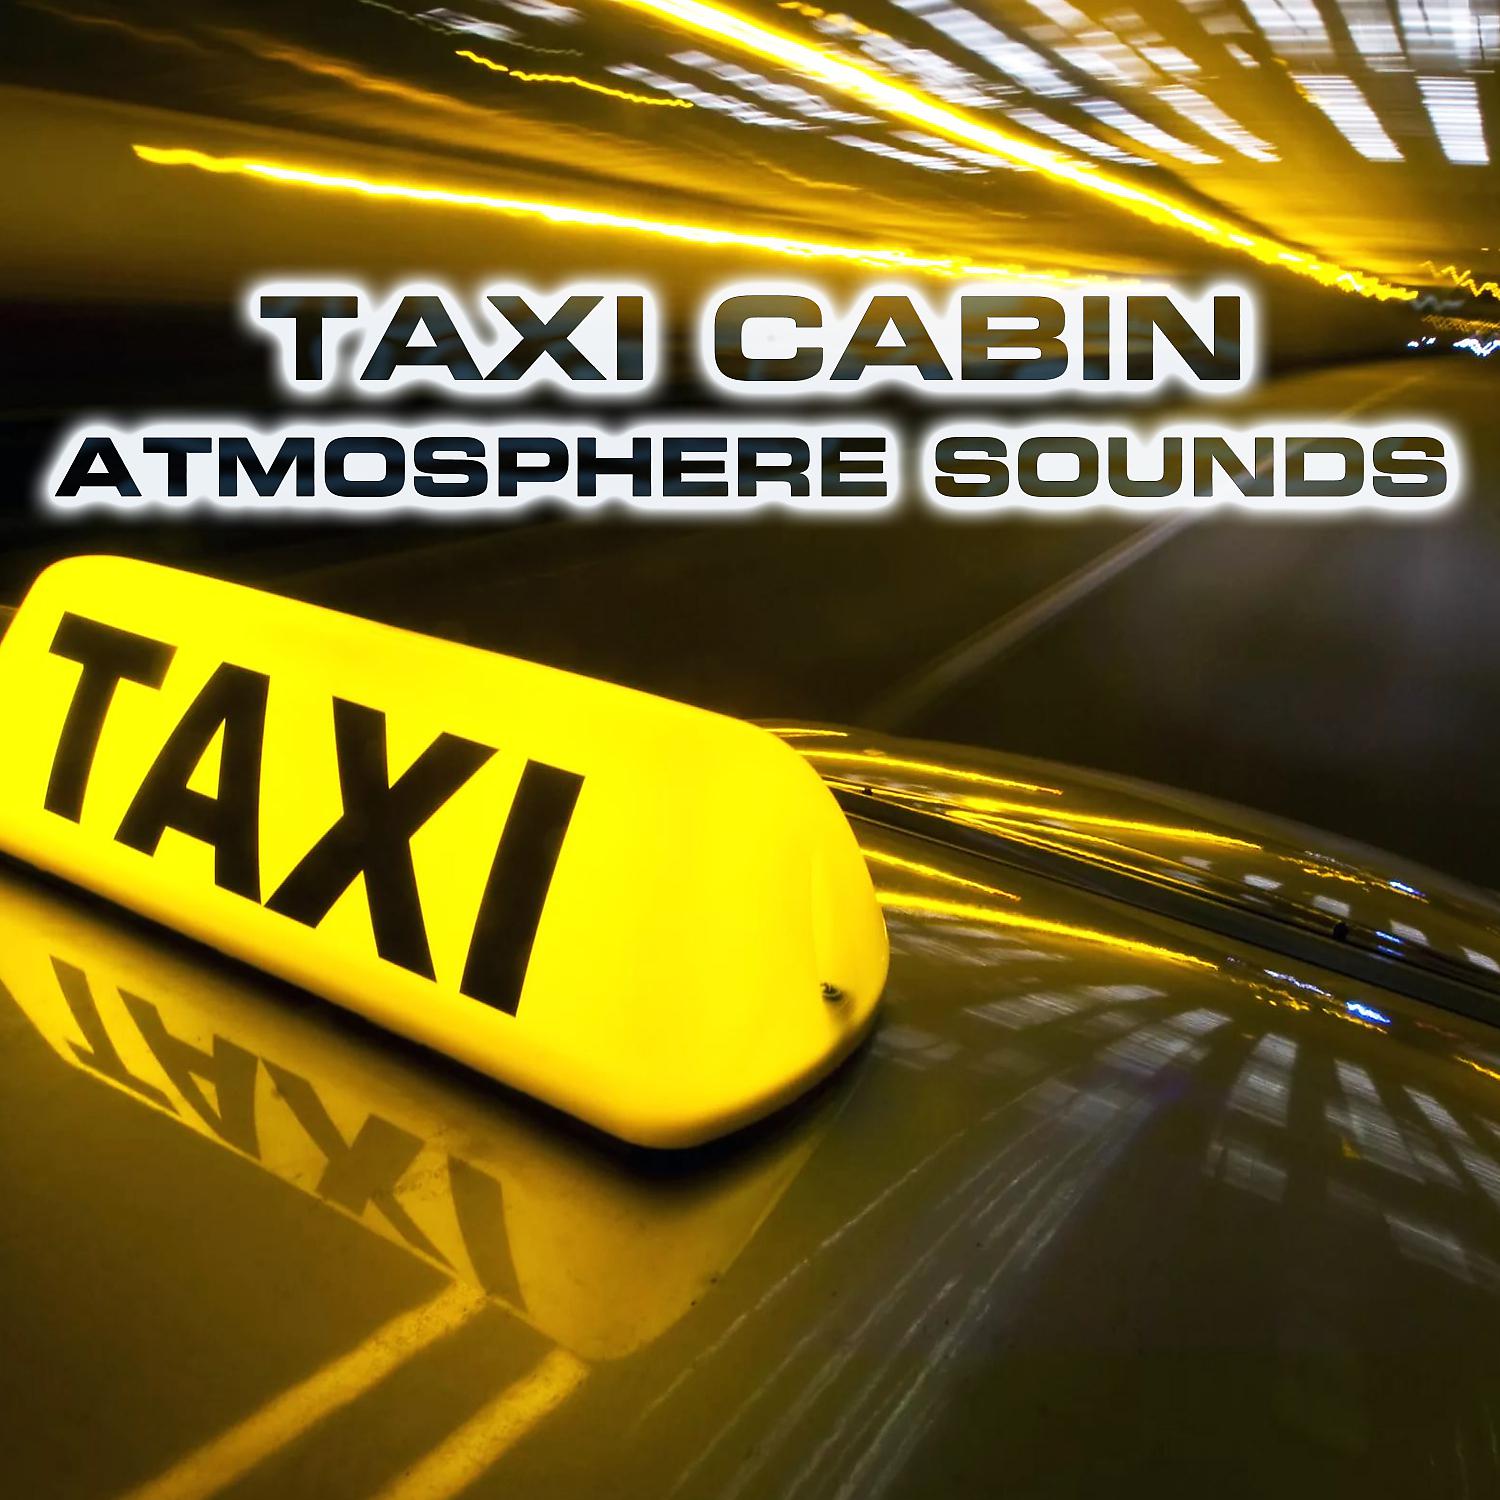 Постер альбома Taxi Cabin Atmosphere Sounds (feat. Taxi Driving Sounds, Air Conditioning Sounds, Bus Ambience Sounds, Weekend Mode Sounds, Aircraft Cabin Sound FX & Nature Sounds FX)